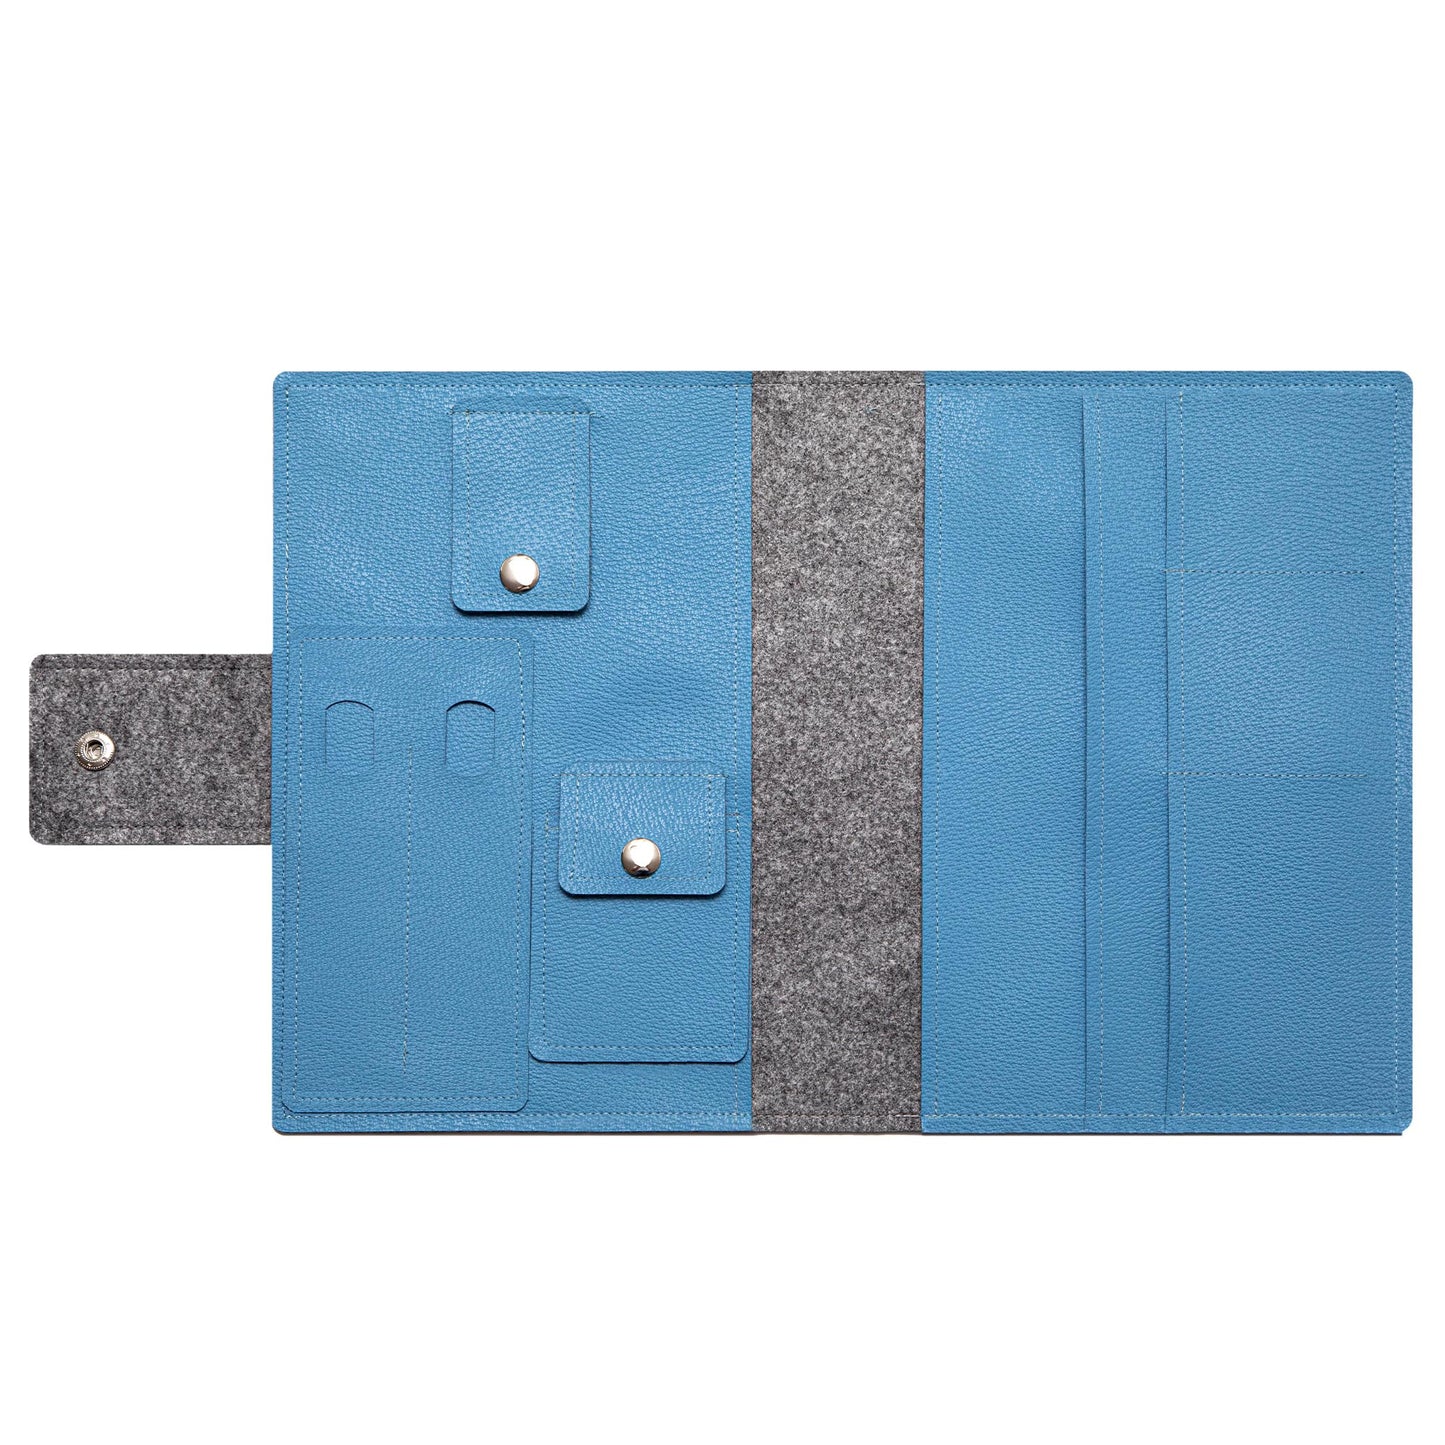 Handmade Folio Cover for iPad/Pro/Air - Sky Blue Faux Leather